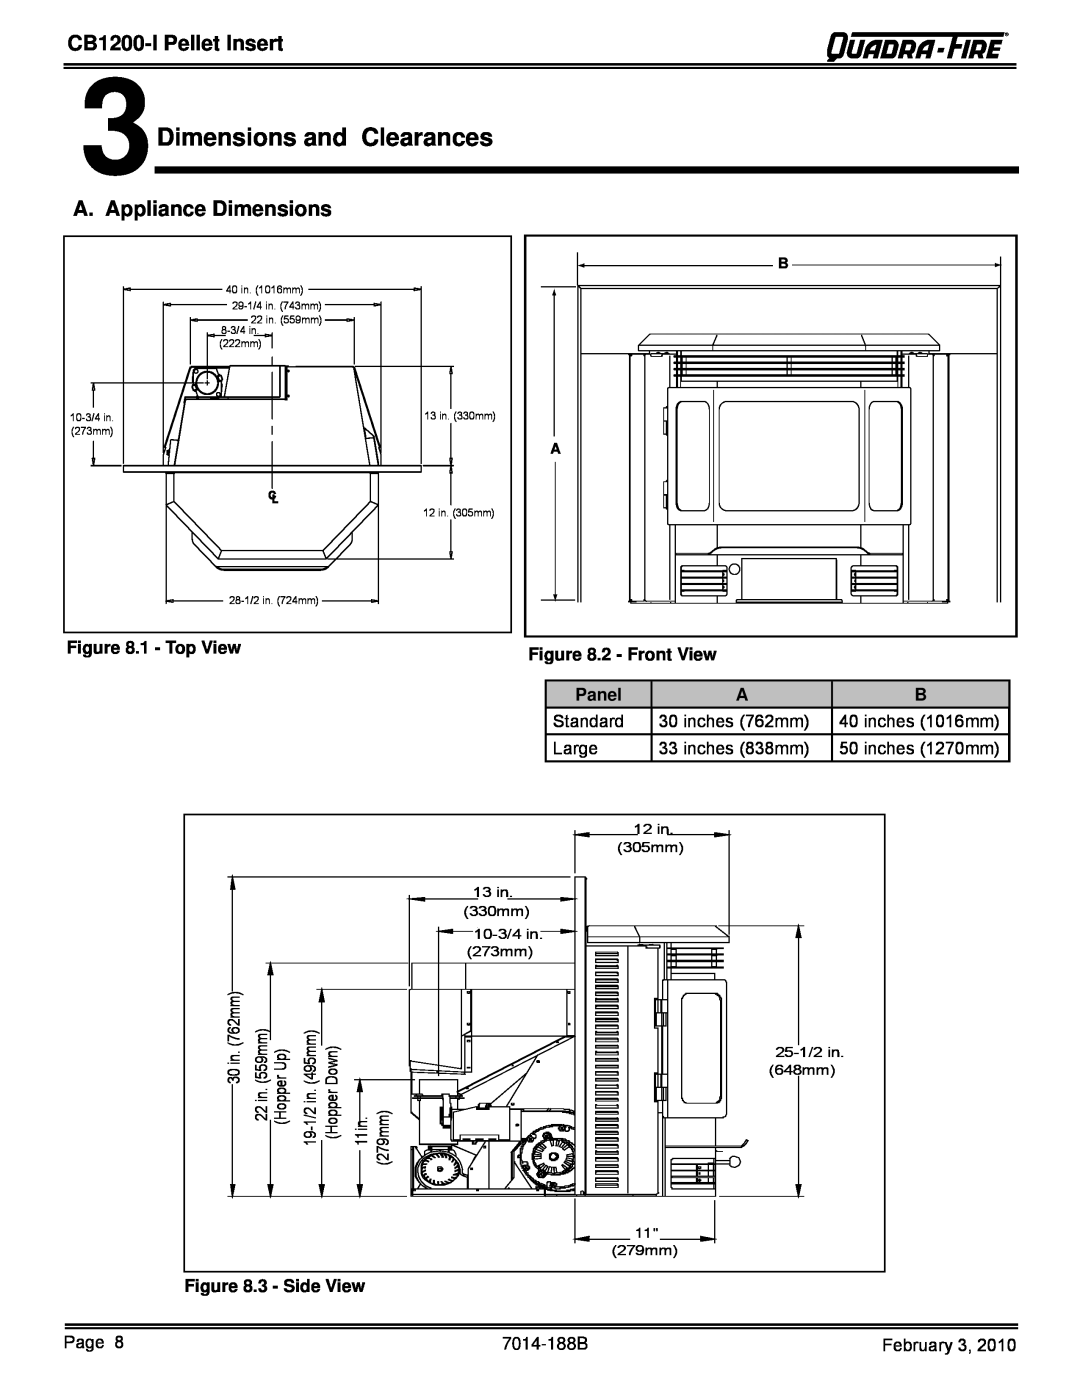 Quadra-Fire CB1200I 3Dimensions and Clearances, A. Appliance Dimensions, CB1200-IPellet Insert, 1 - Top View, Panel 